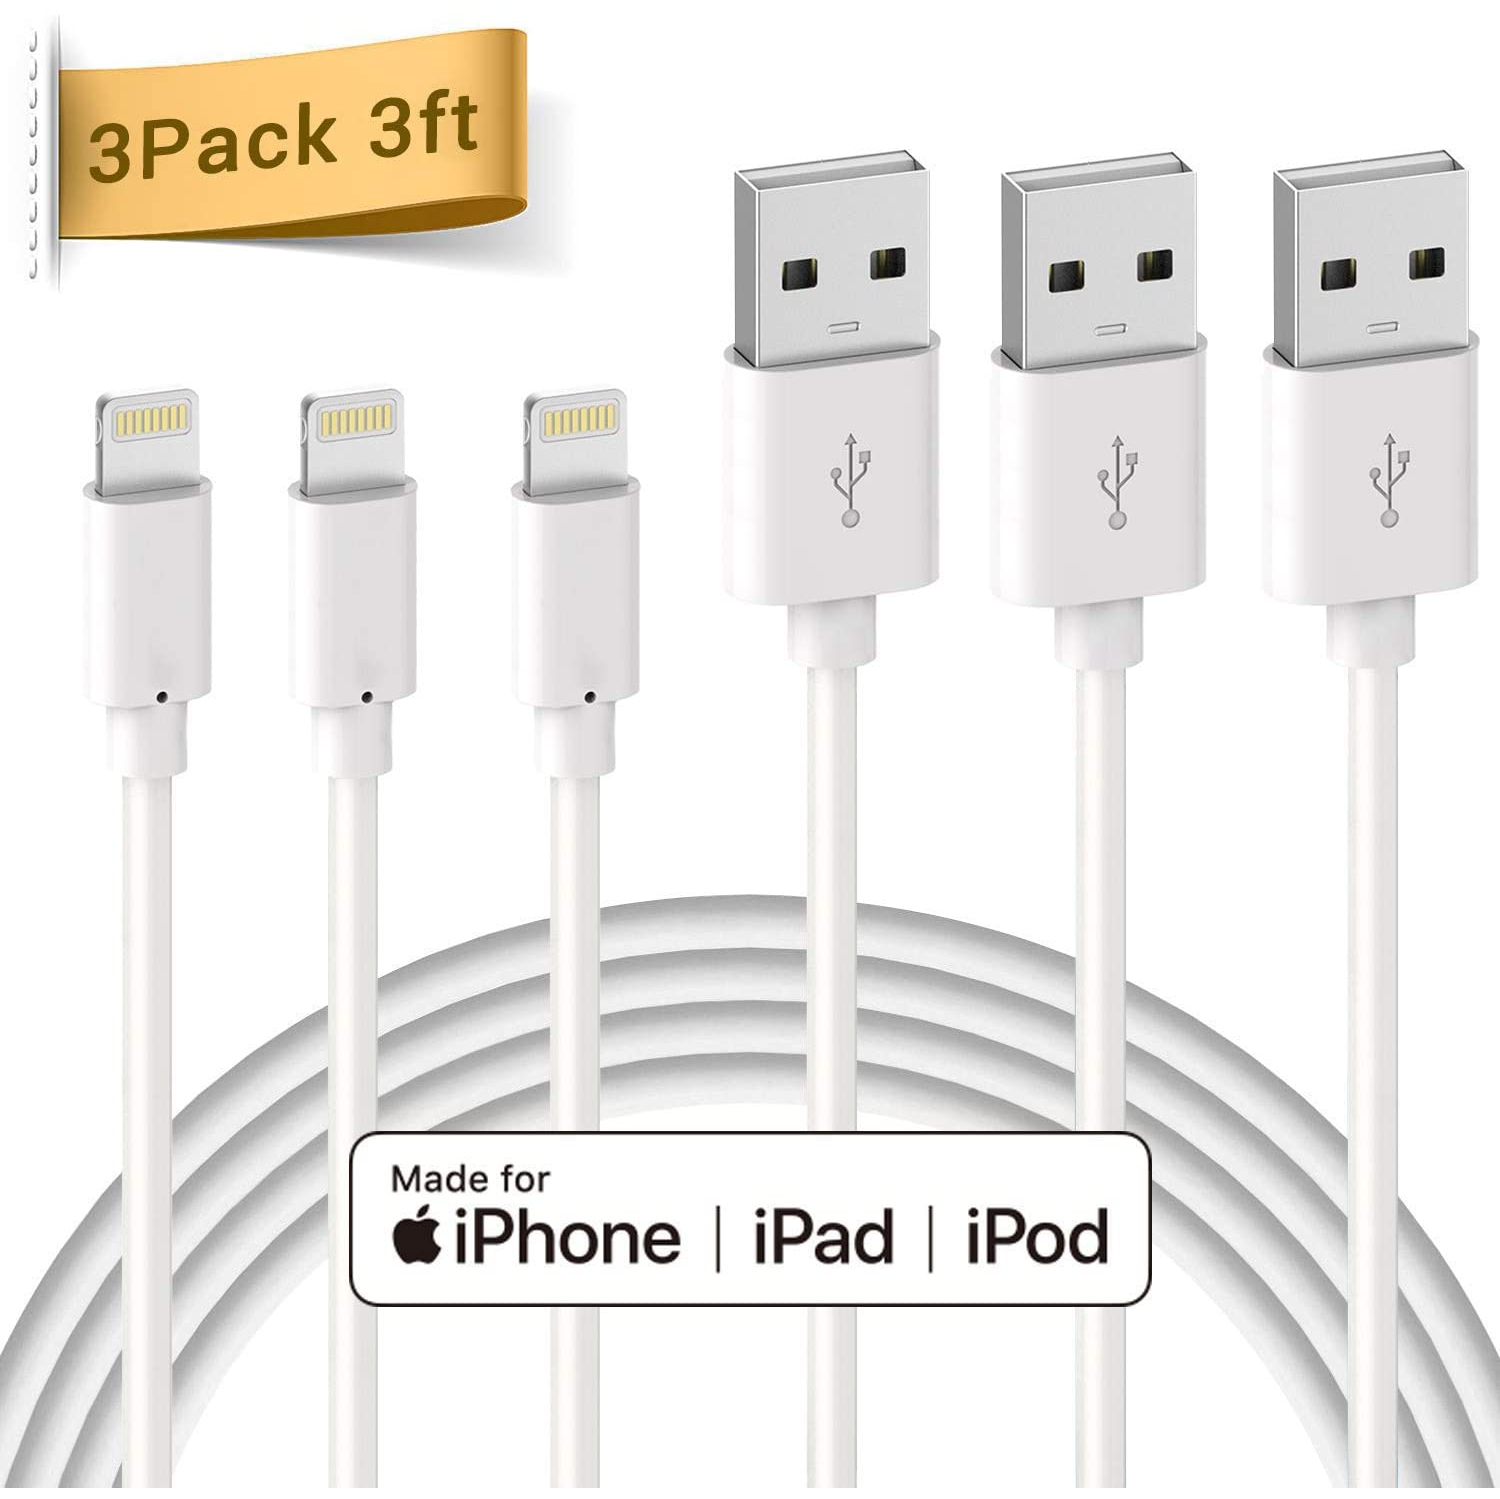 [3 Pks] (3.3Ft / 1m) iPhone iPad Charging Cable Charger Cord Lightning to USB Cable COMPATIBLE for iPod iPad iPhone Pro Max